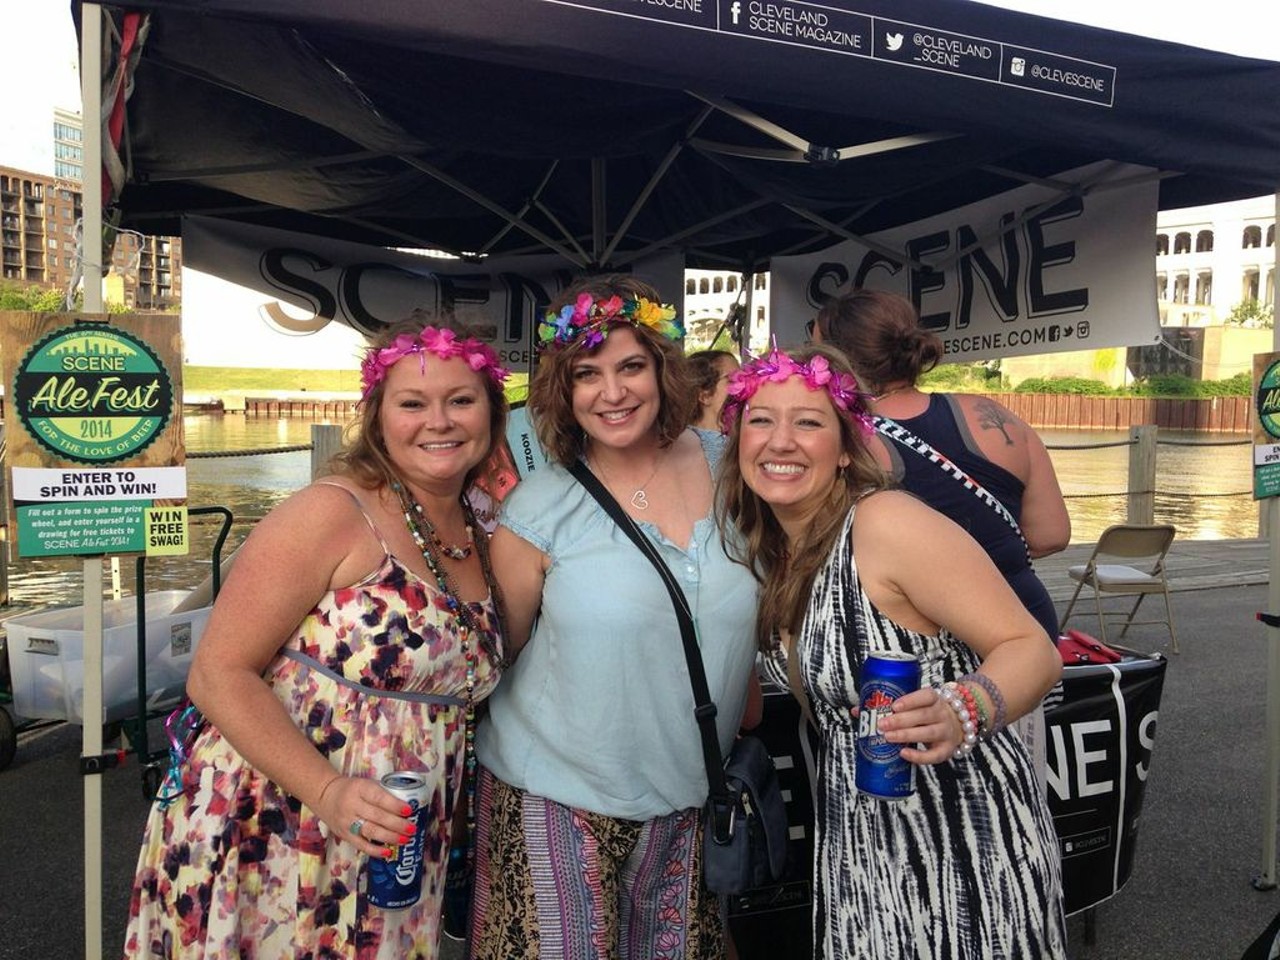 13 Photos of the Scene Events Team Driven by Fiat at Widespread Panic